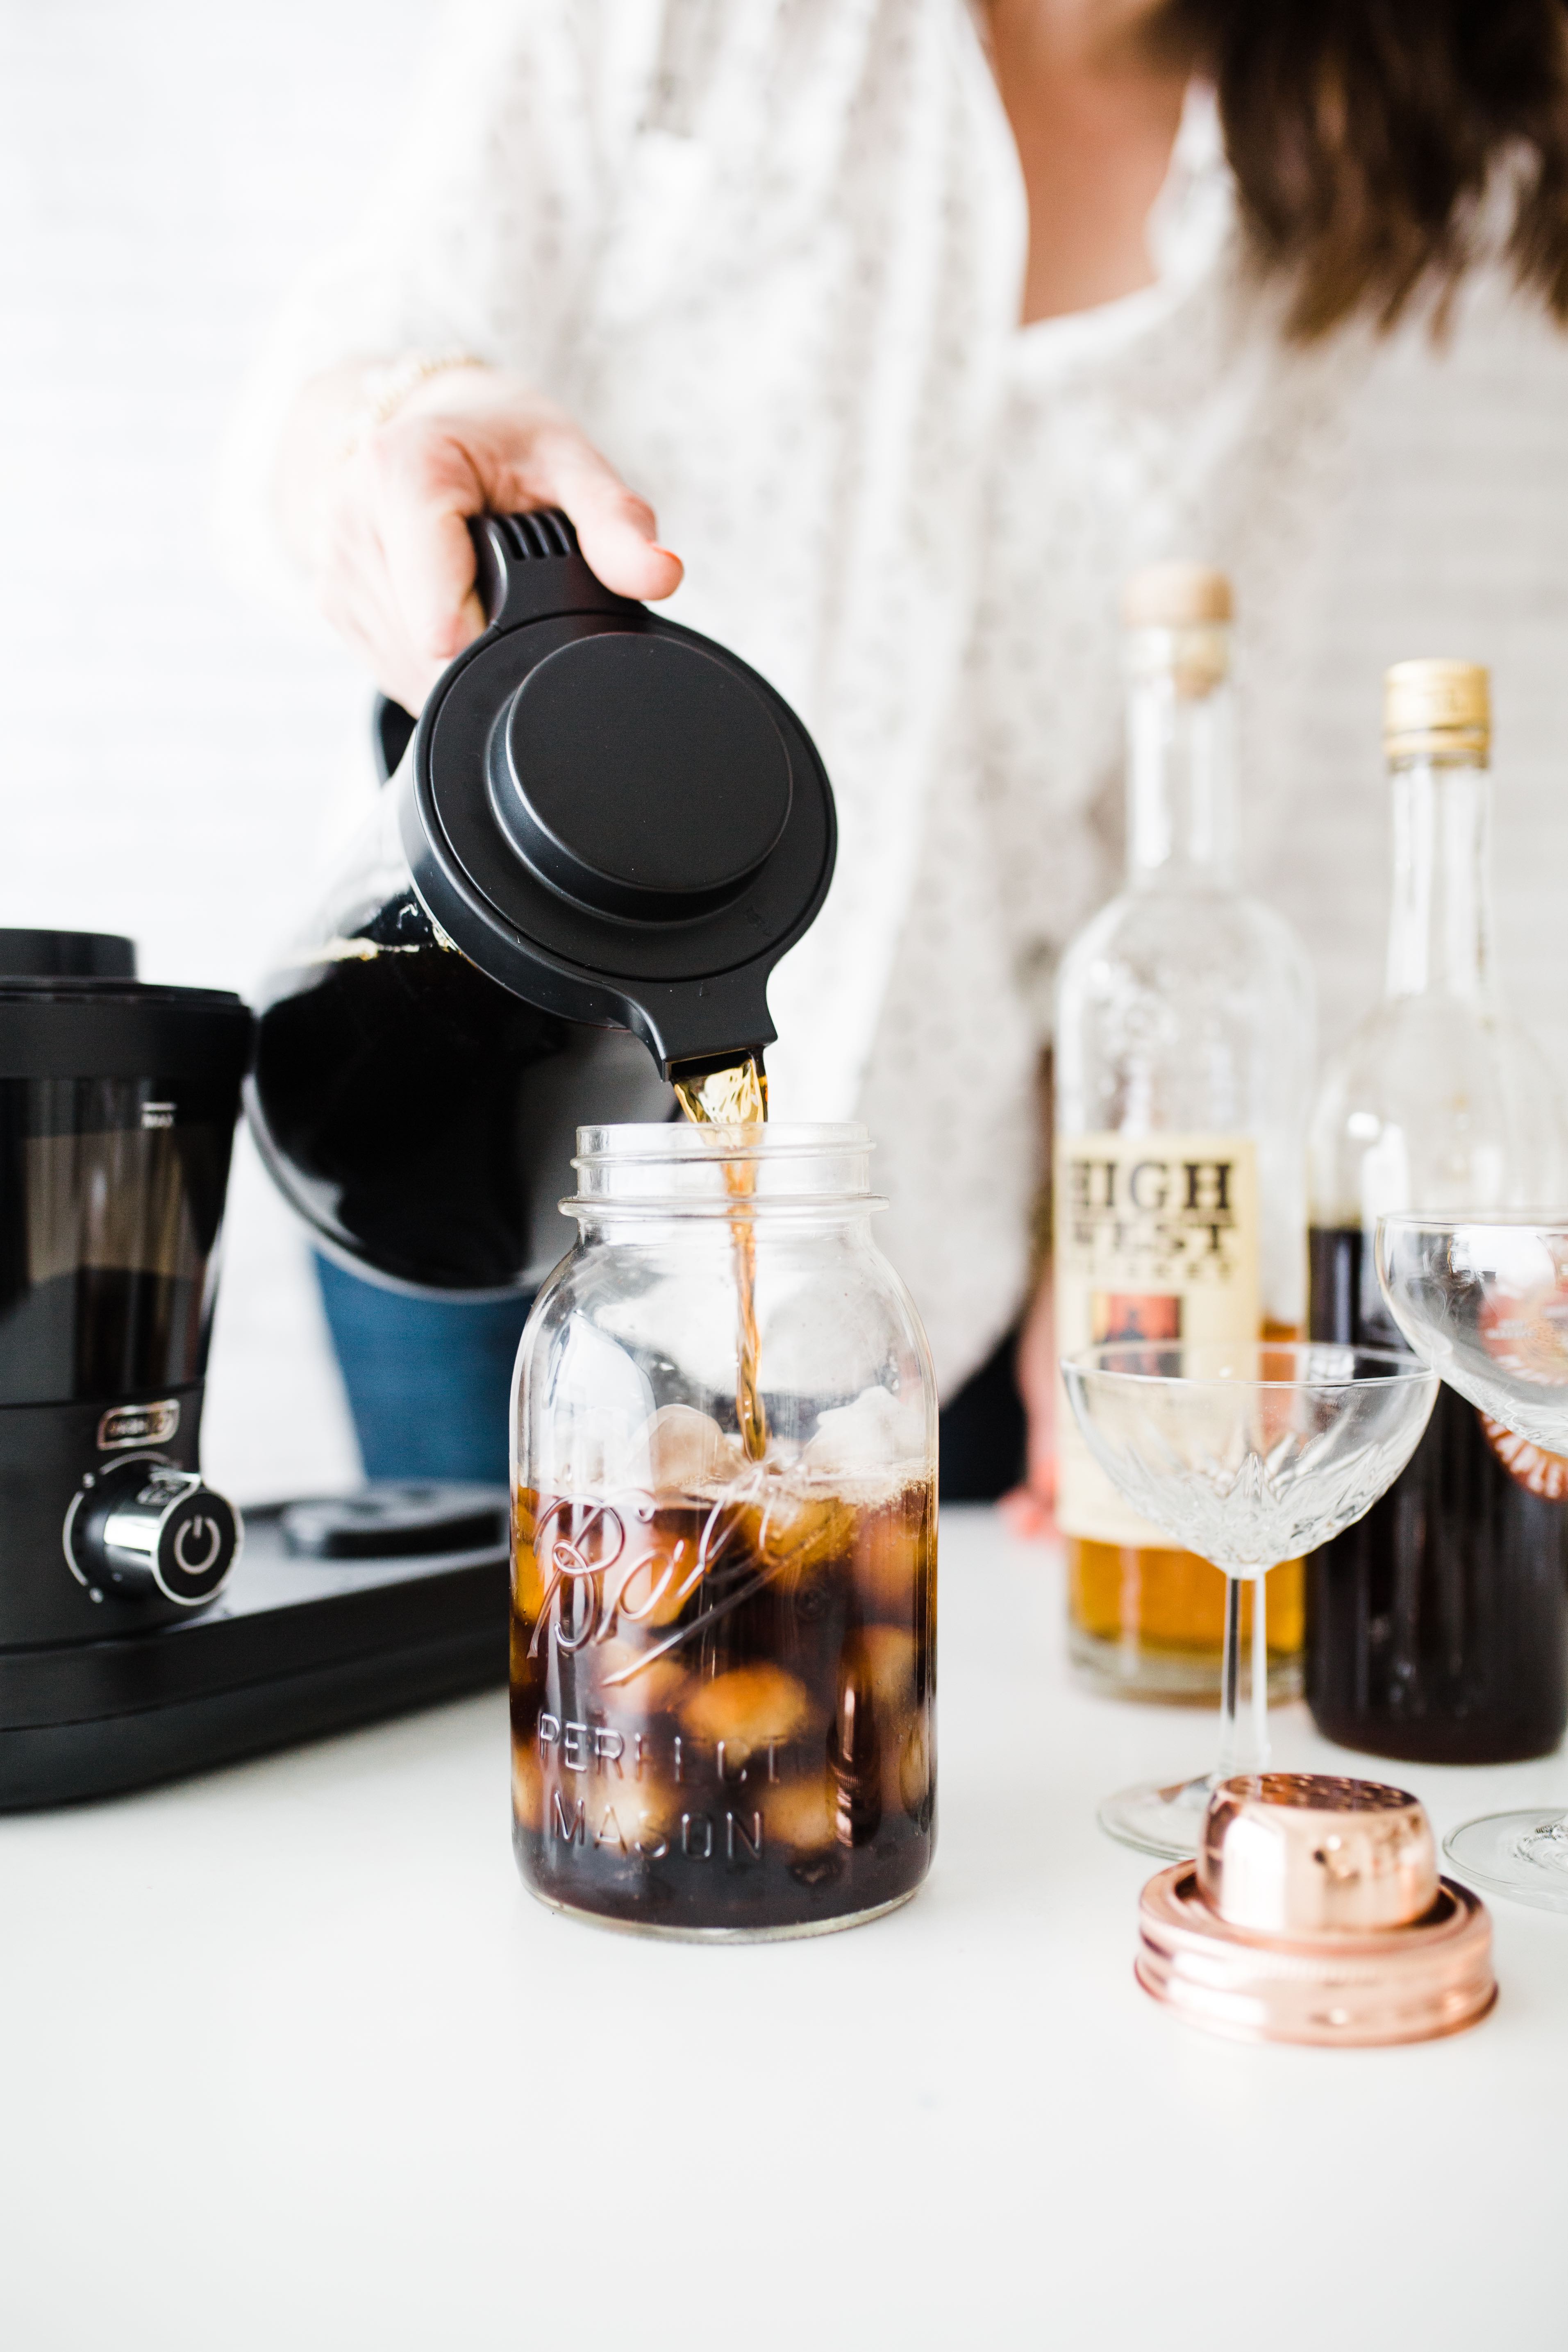 https://theinspiredhome.com/wp-content/uploads/2023/02/2018-02-IHA-COFFEE-Cold-Brew-3-resize.jpg